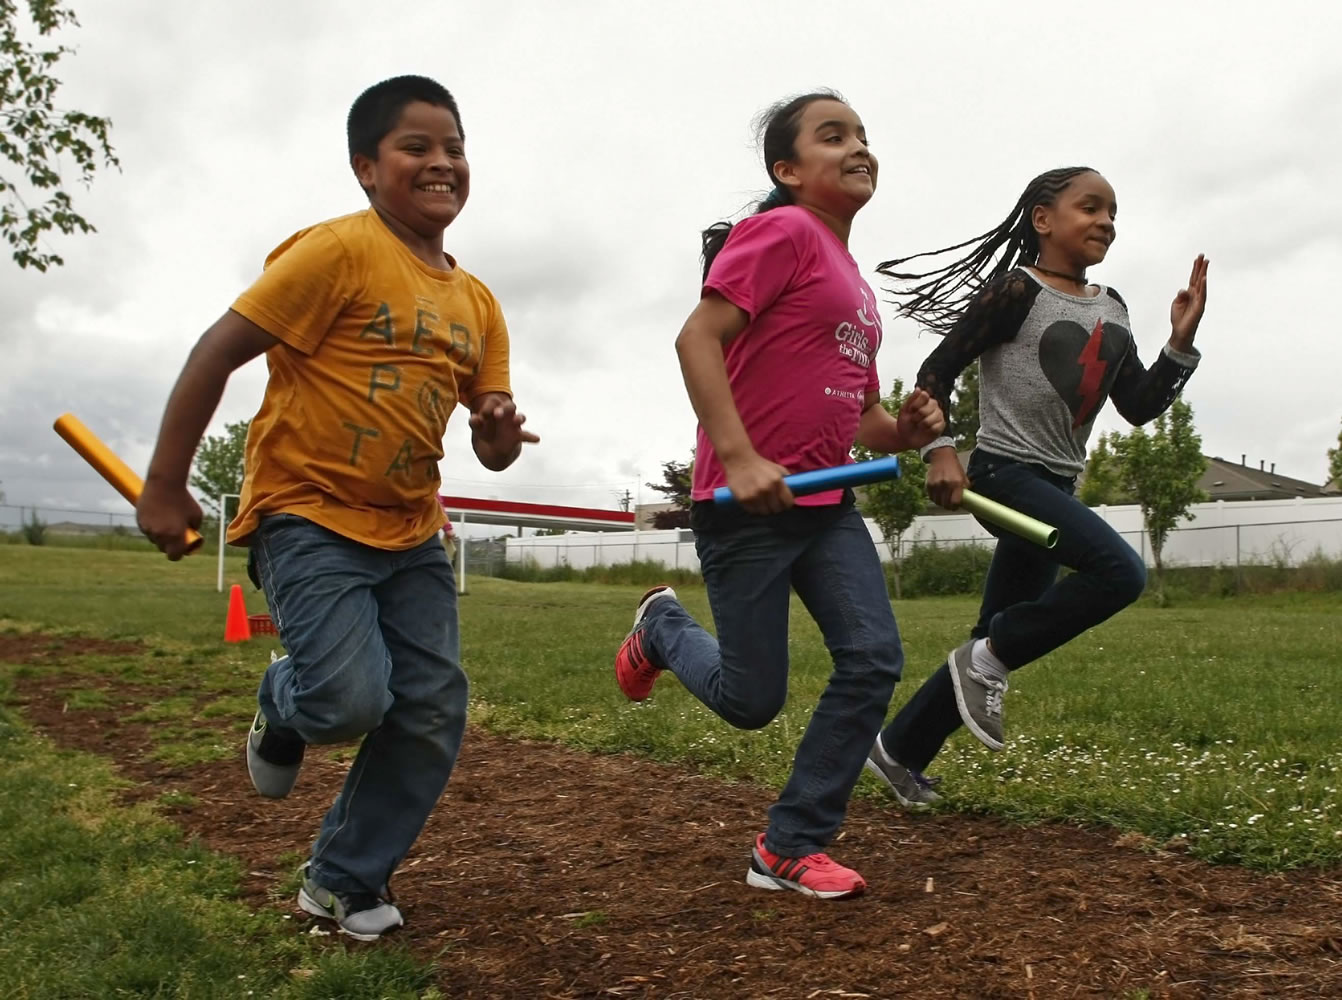 Fourth-graders, from left, Adolfo Dominguez, Lizbeth Gonzalez and Dimiah Bell practice with Hallman Elementary School's relay team in Keizer, Ore. Many of the runners received shoes from the One Thousand Soles drive.